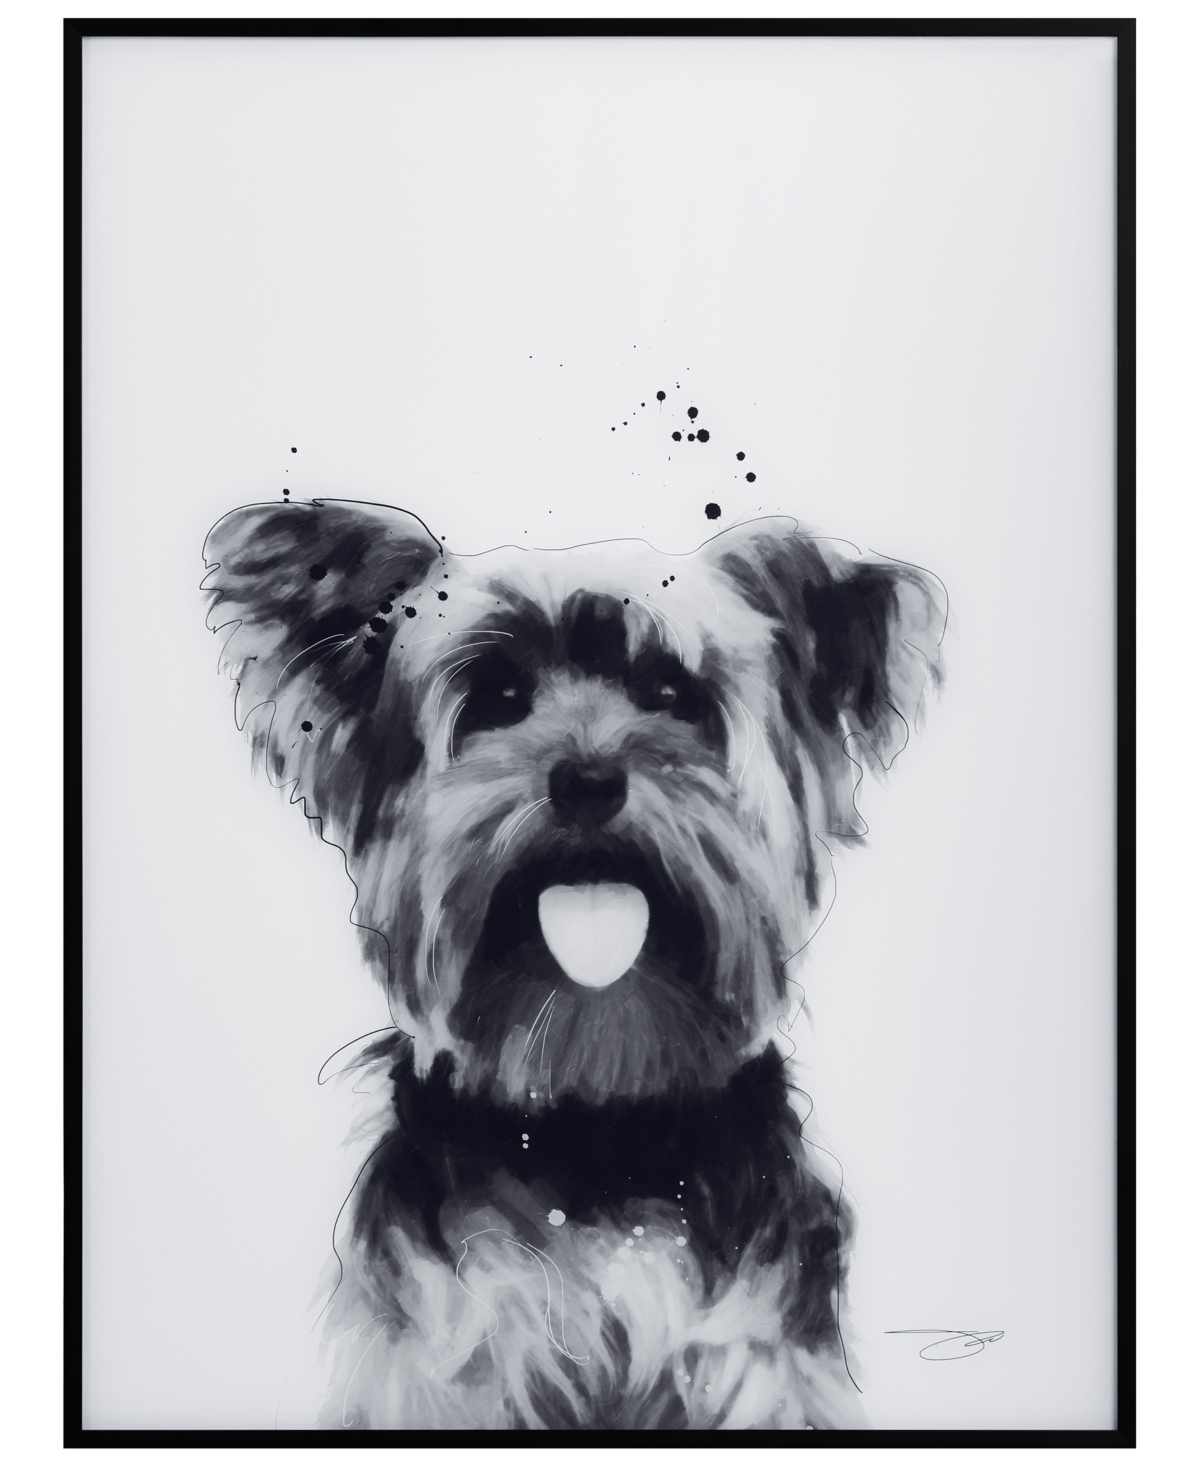 Empire Art Direct "yorkshire Terrier" Pet Paintings On Printed Glass Encased With A Black Anodized Frame, 24" X 18" X In Black And White